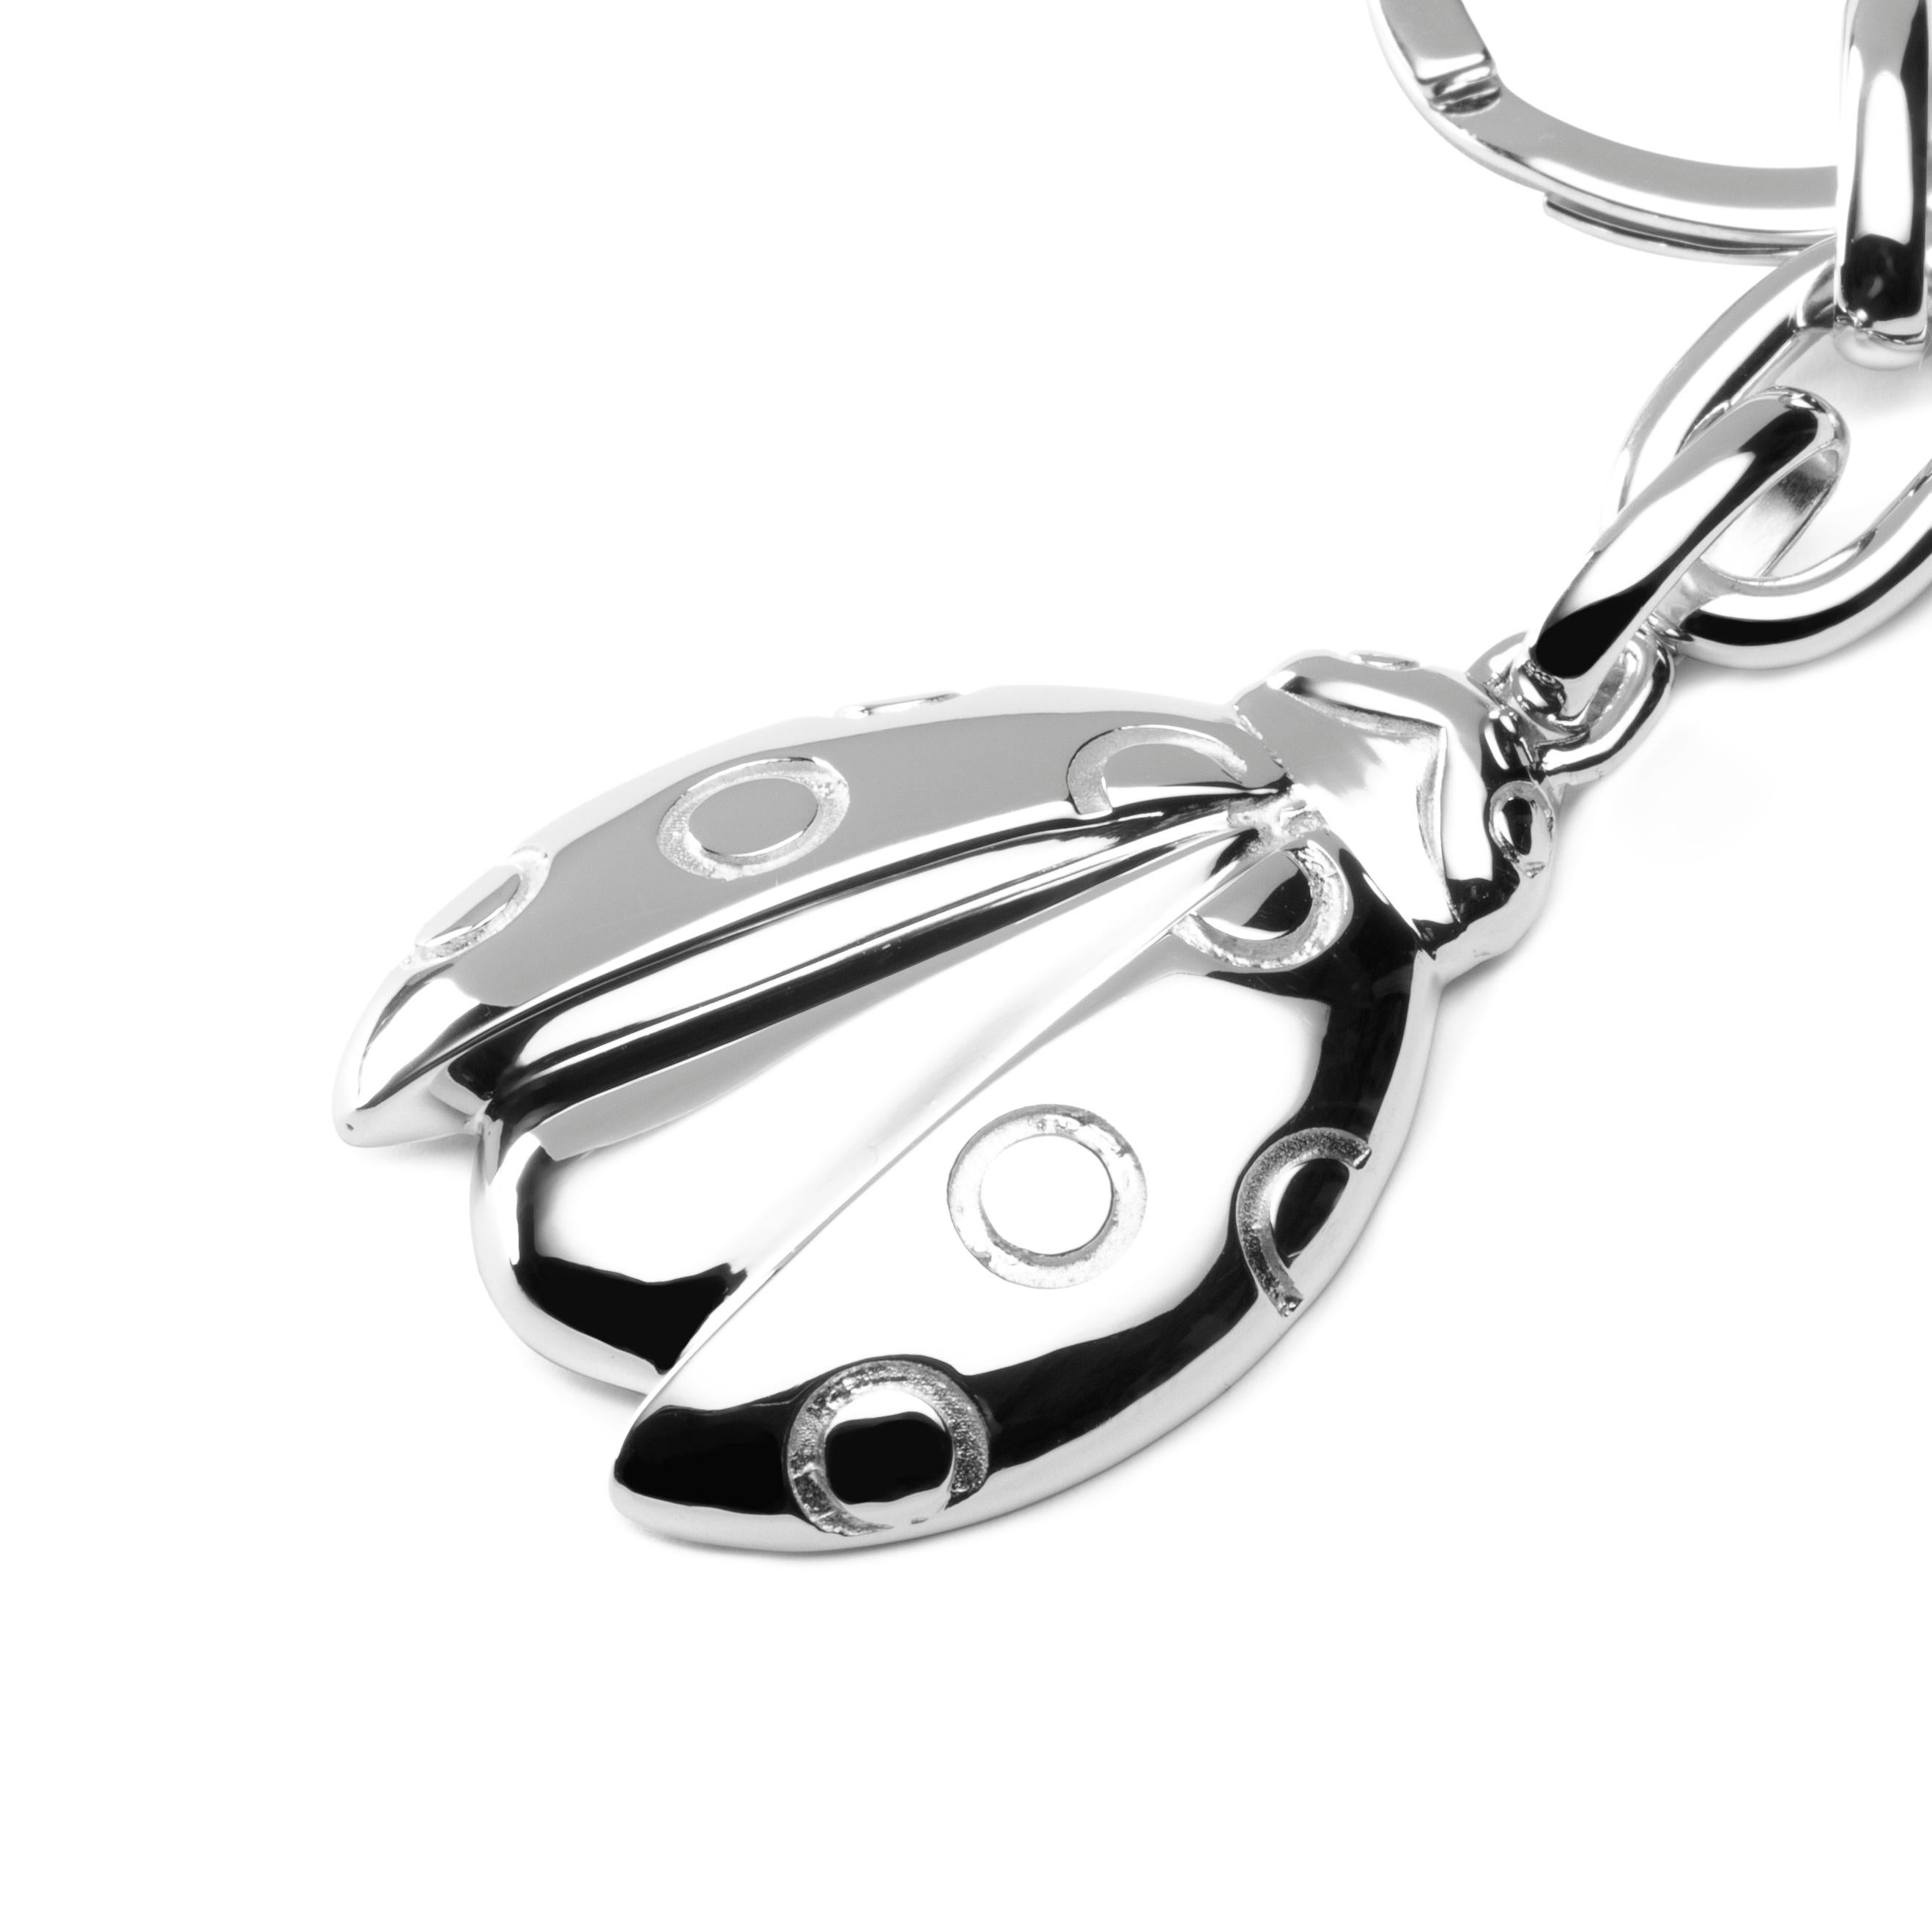 Jona design collection, hand crafted in Italy, rhodium plated Sterling Silver Ladybug key holder.
Dimensions : L 3.71 in/ 94.36 mm x W 0.98 in/ 24.91 mm x Depth: 0.08 in/ 2.26 mm
All Jona jewelry is new and has never been previously owned or worn.